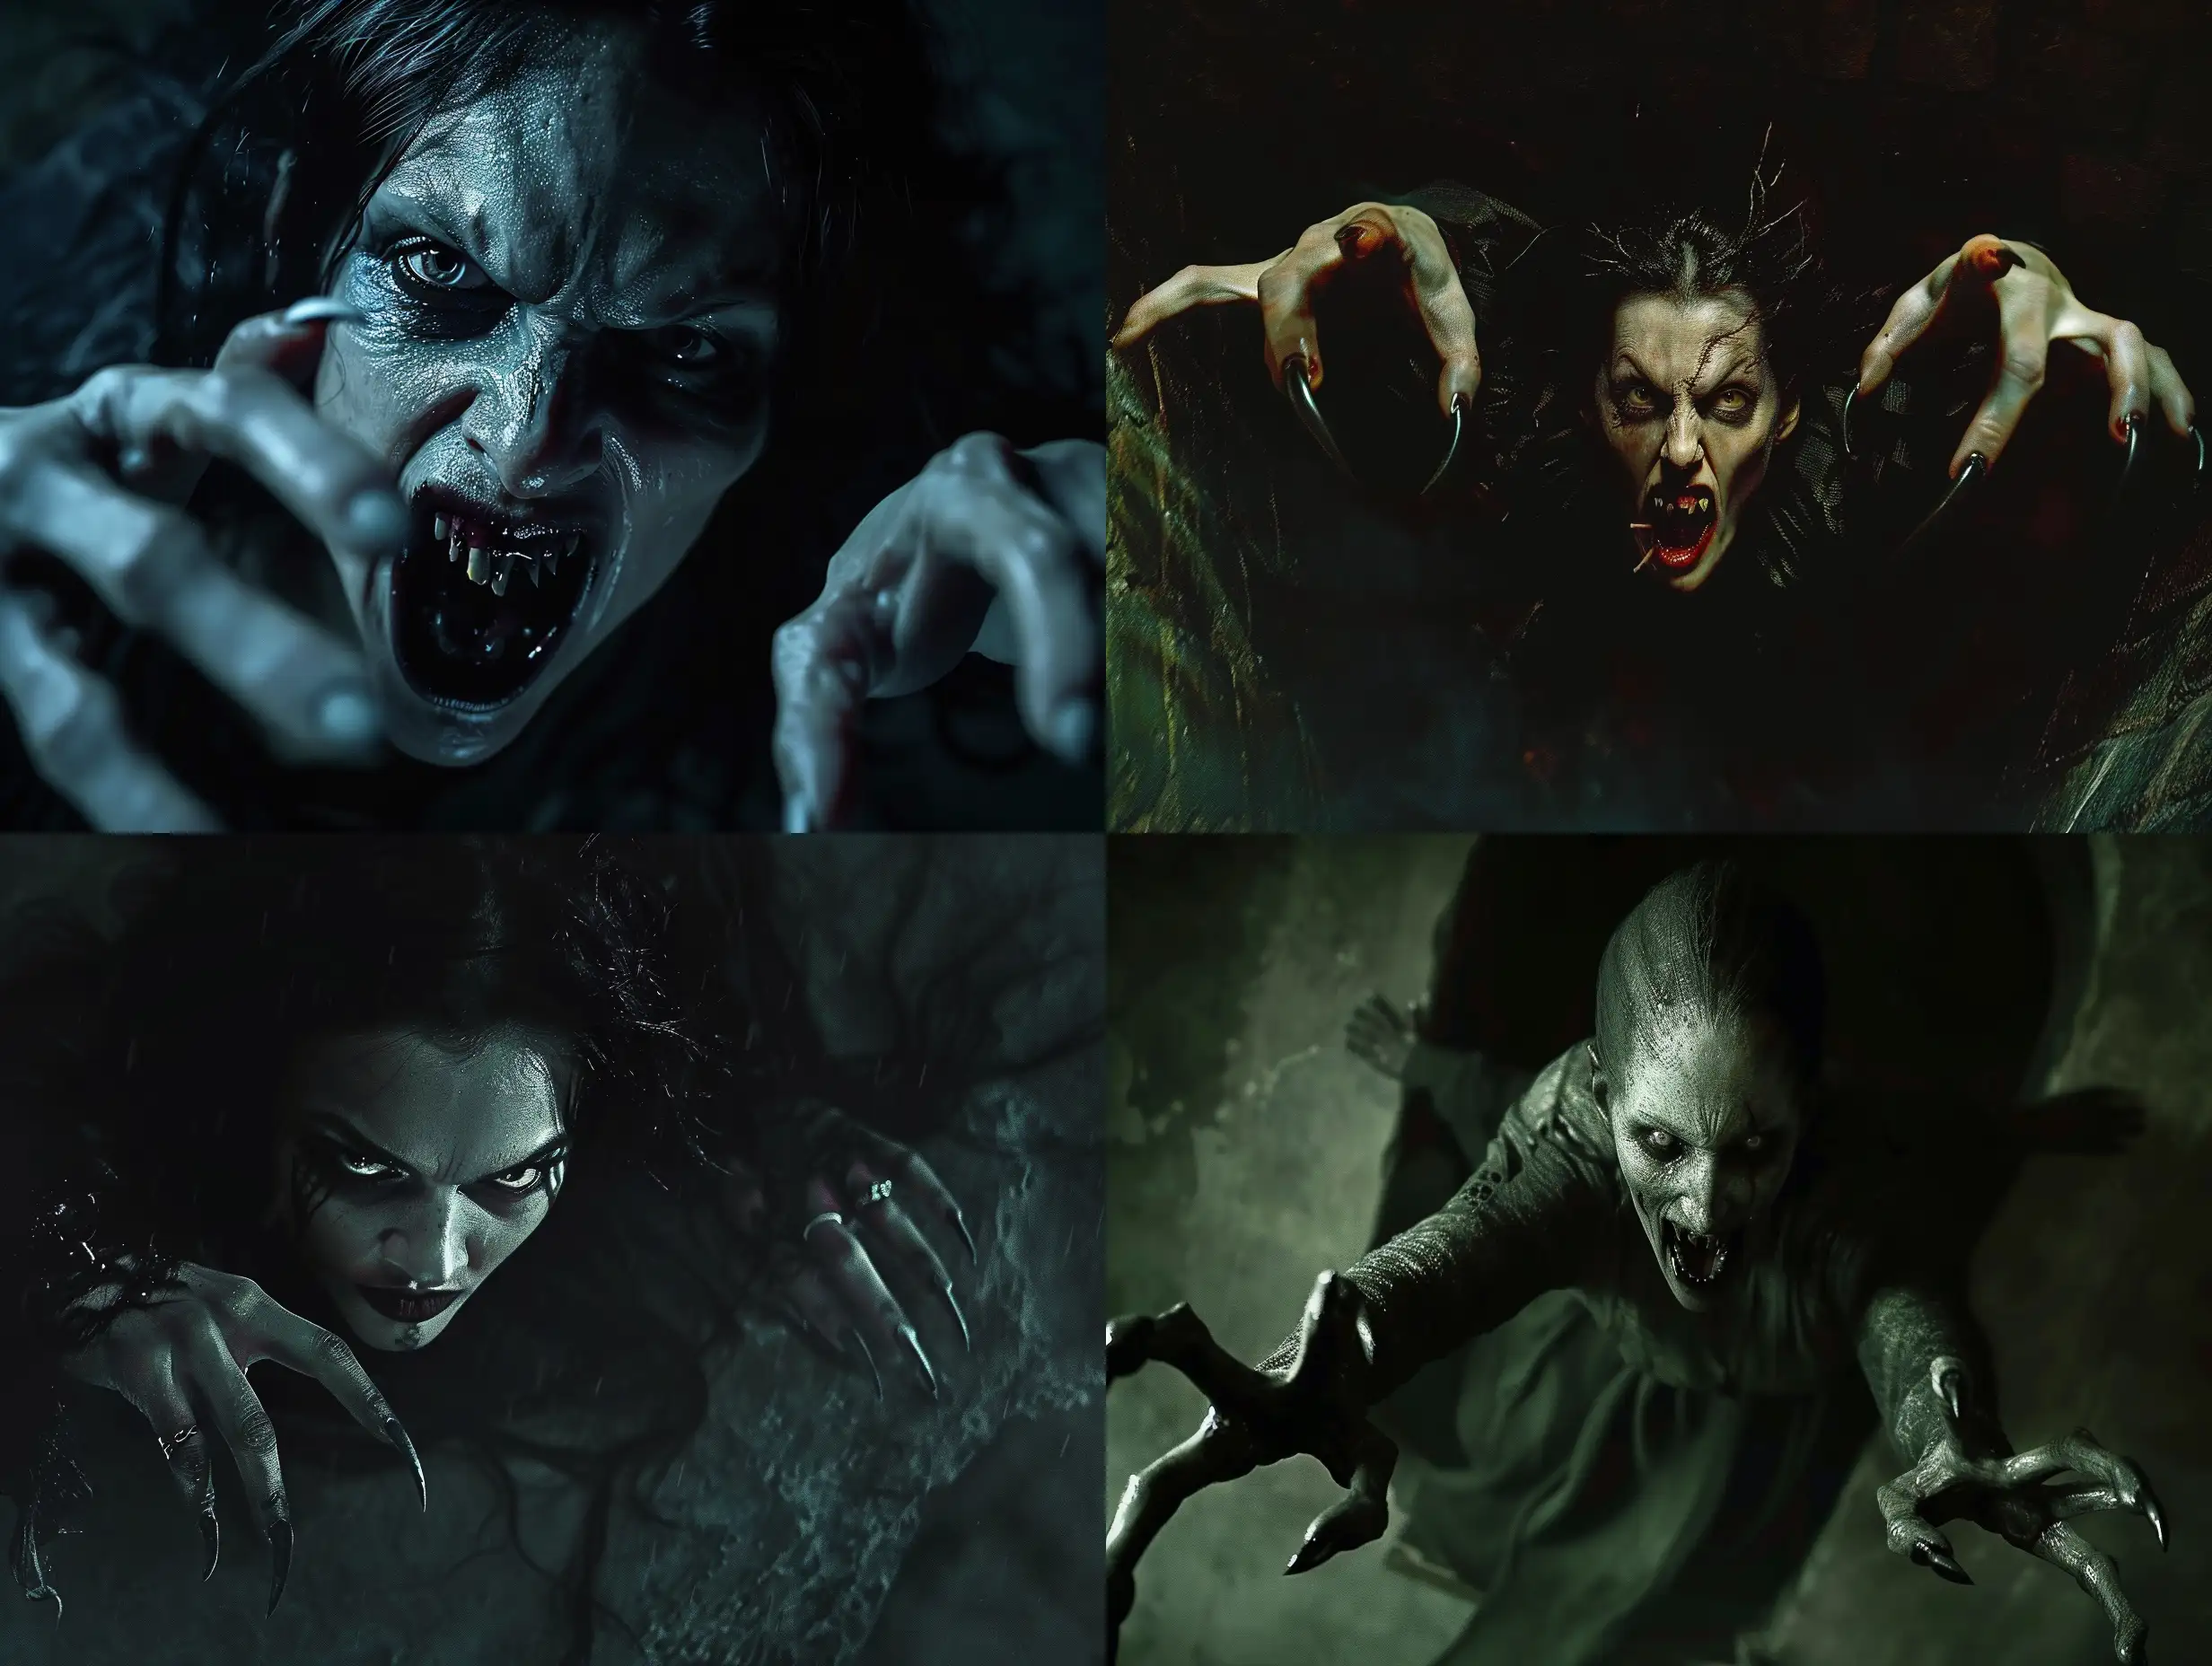 The central figure is a monstrous vampire woman, portrayed with photorealistic detail. She emerges dramatically from darkness, setting a chilling tone. The vampire's appearance is emphasized by her extra-long pointed fingernails resembling predatory claws, and her menacing open mouth revealing terrifying fangs. The setting is dark and cinematic, enhancing the eerie atmosphere. The scene utilizes intense, atmospheric lighting to highlight hyper-realistic details, ensuring every aspect of the vampire's anatomy and textured features is meticulously portrayed. The color palette leans towards shadows and deep hues to enhance the creepy ambiance. The vampire appears as if climbing out of a grave, adding to the horror. The focus is on capturing the visceral terror of the moment, with attention to the intricate details of the vampire's transformation and the haunting